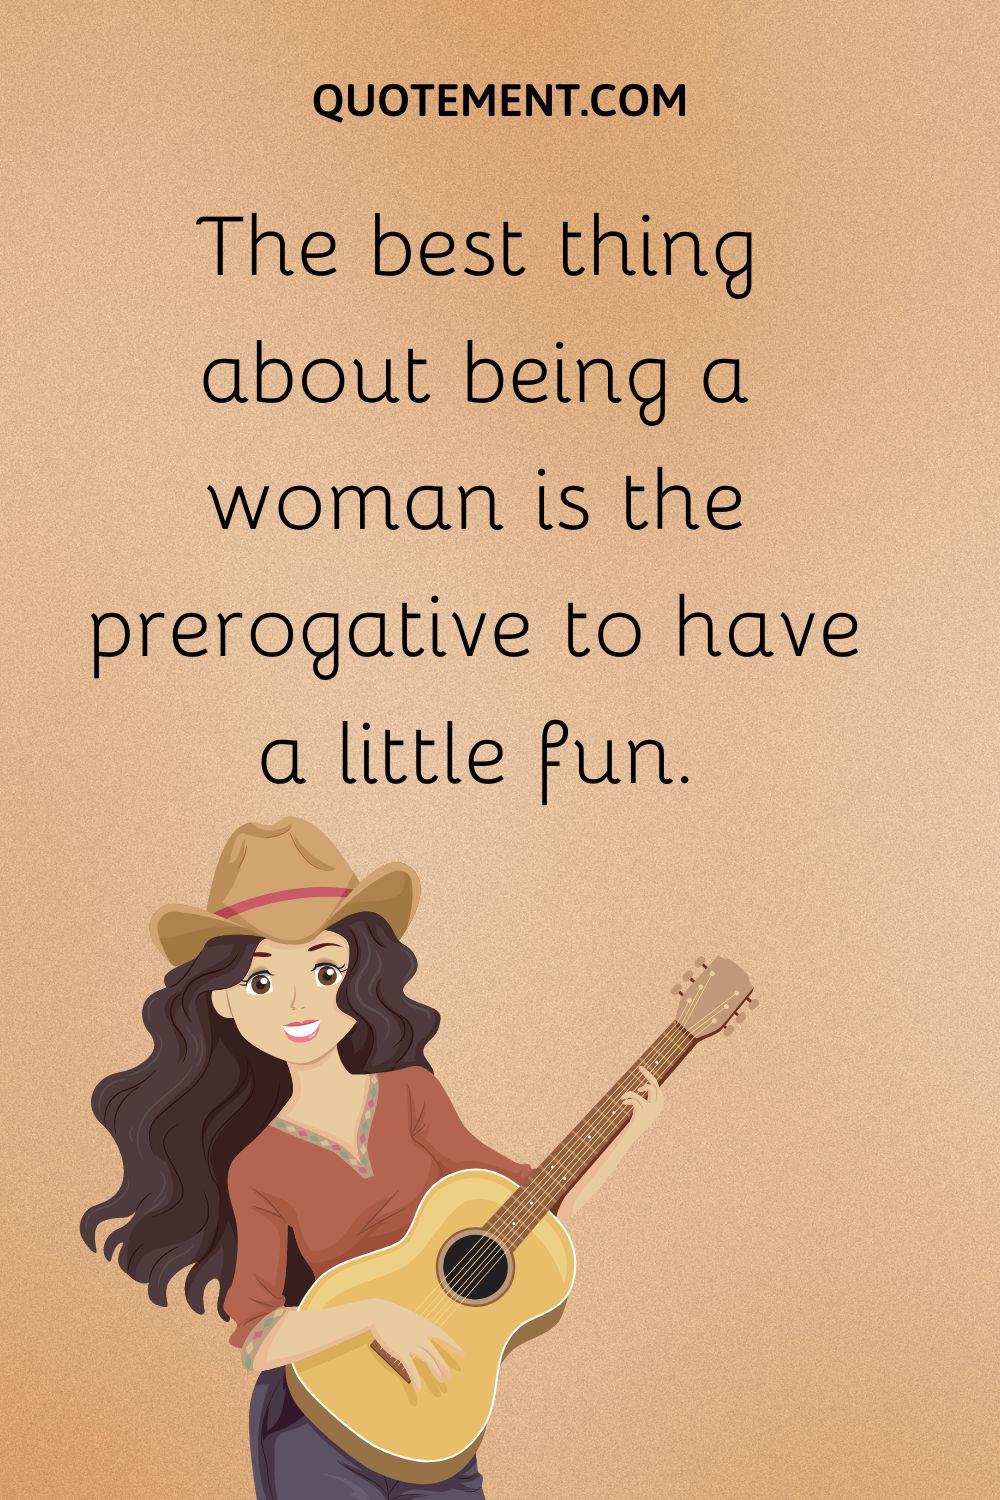 The best thing about being a woman is the prerogative to have a little fun